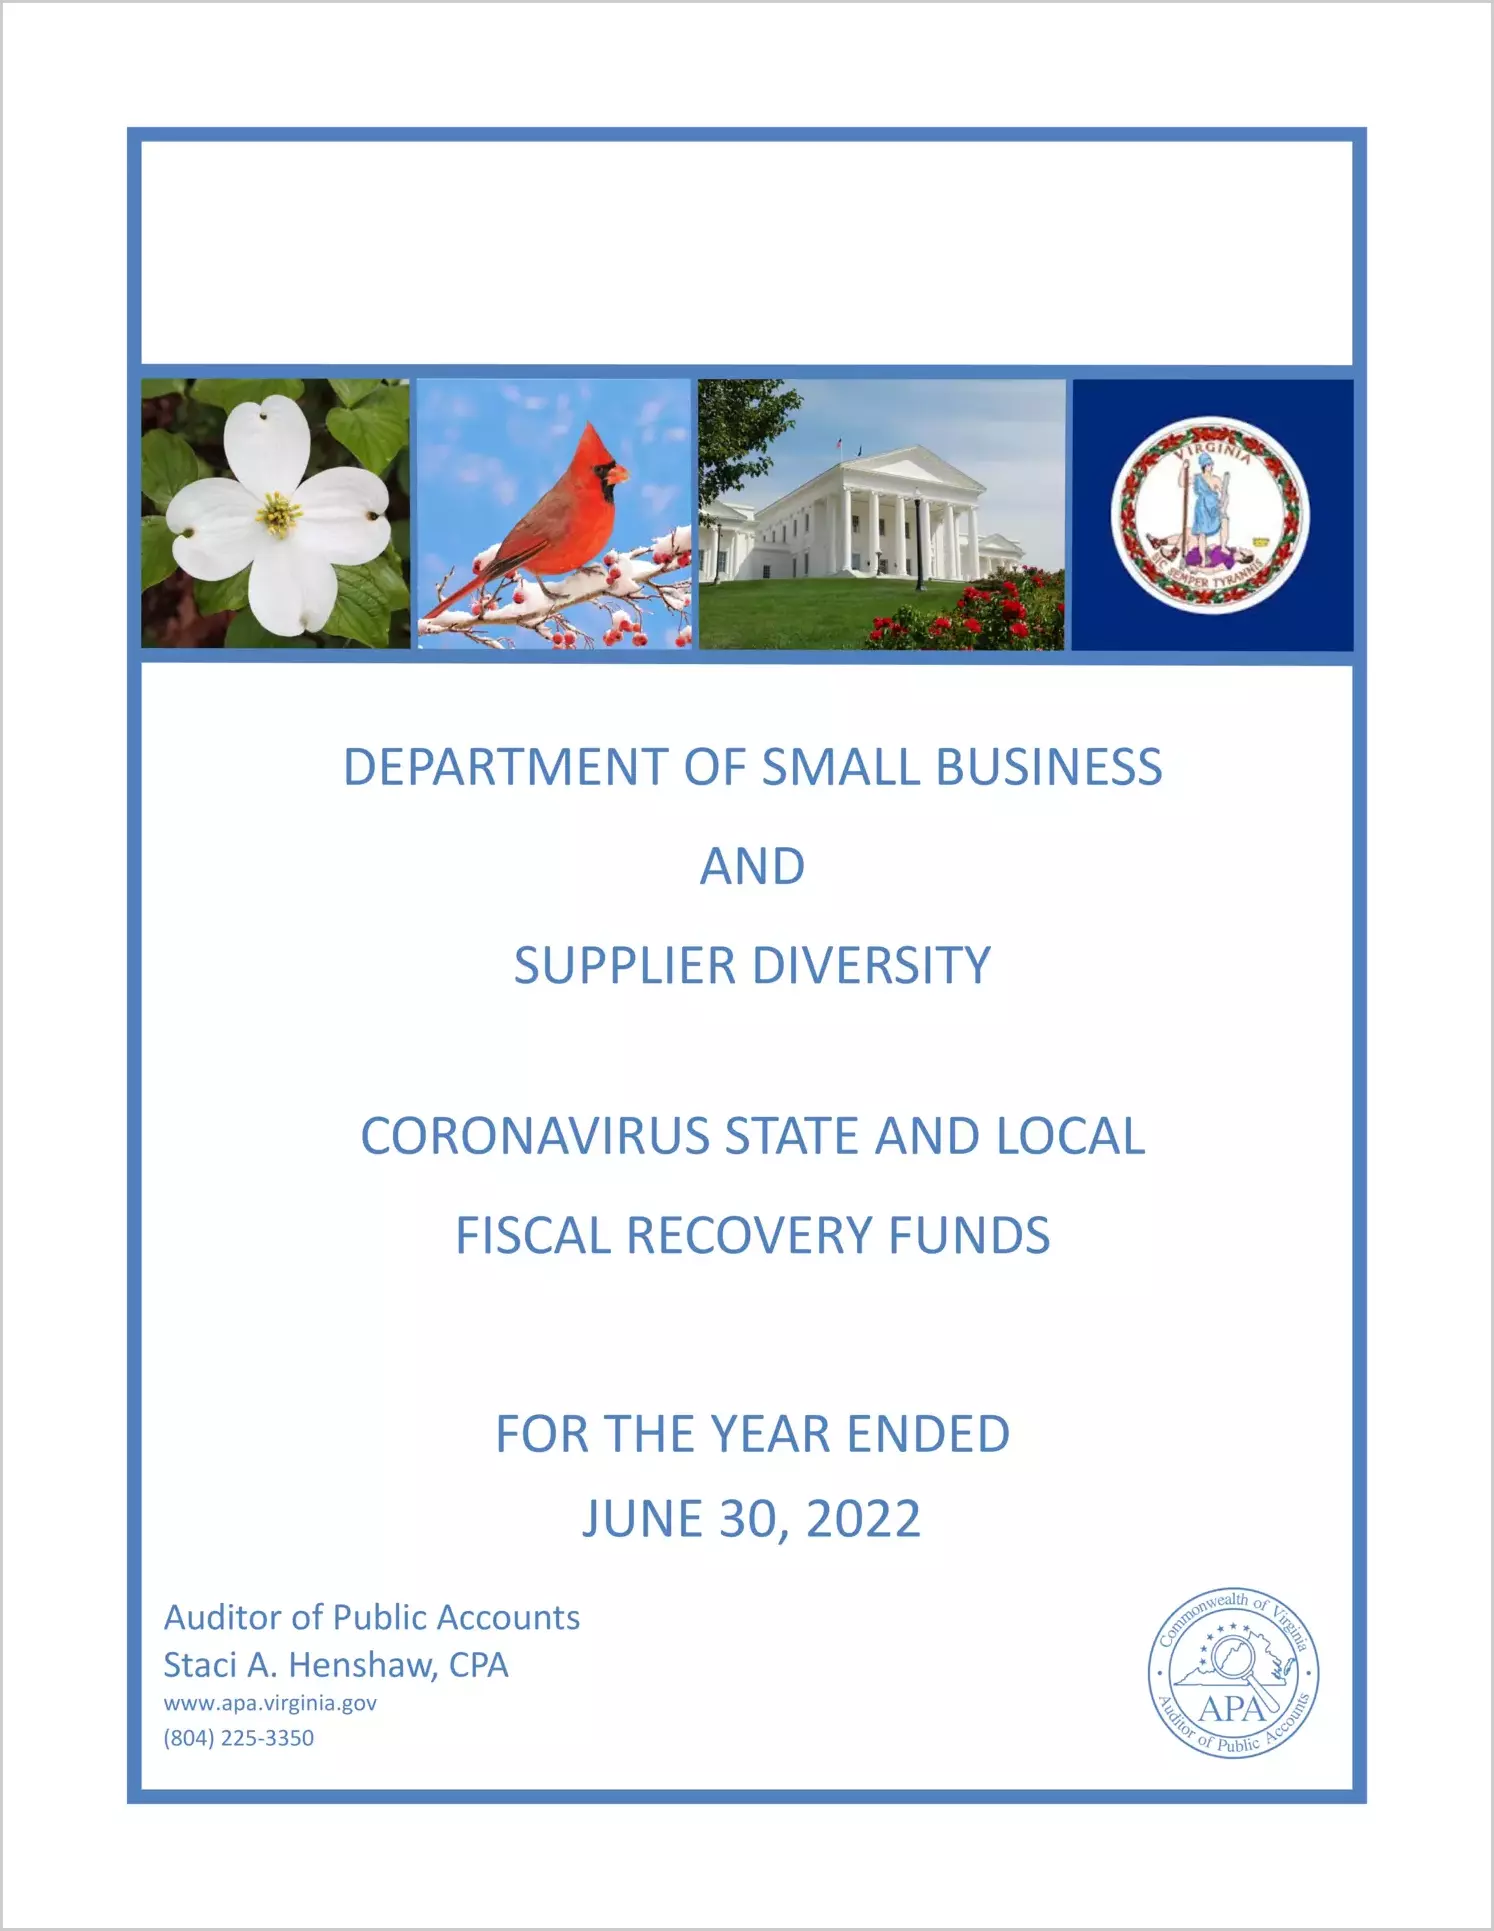 Department of Small Business and Supplier Diversity Coronavirus State and Local Fiscal Recovery Funds for the year ended June 30, 2022